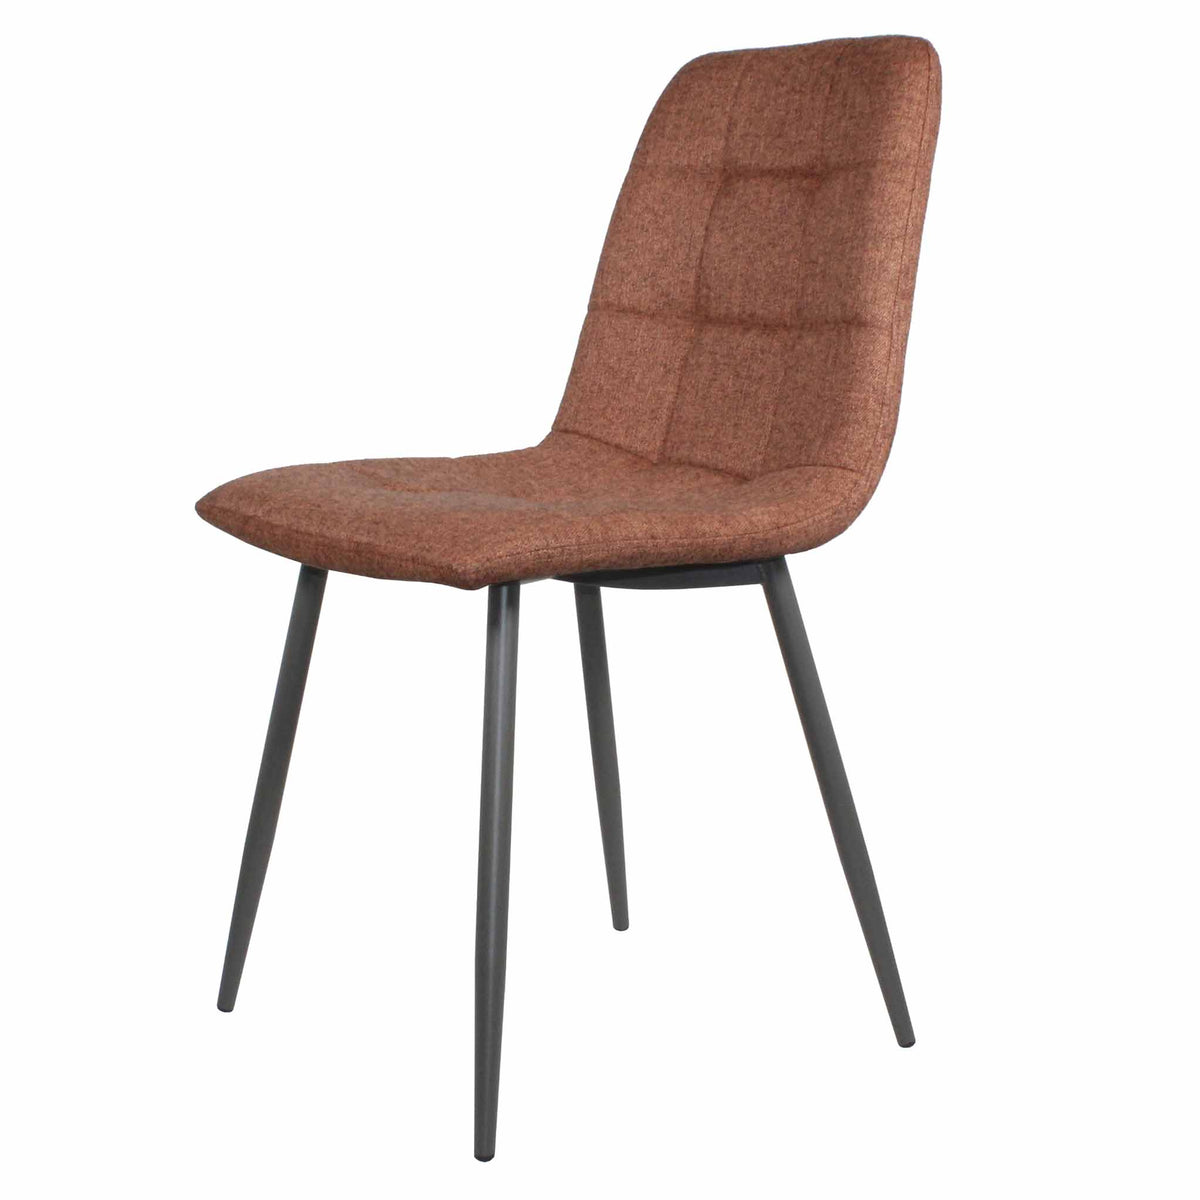 Olivia Orange Dining Chair with Grey Legs